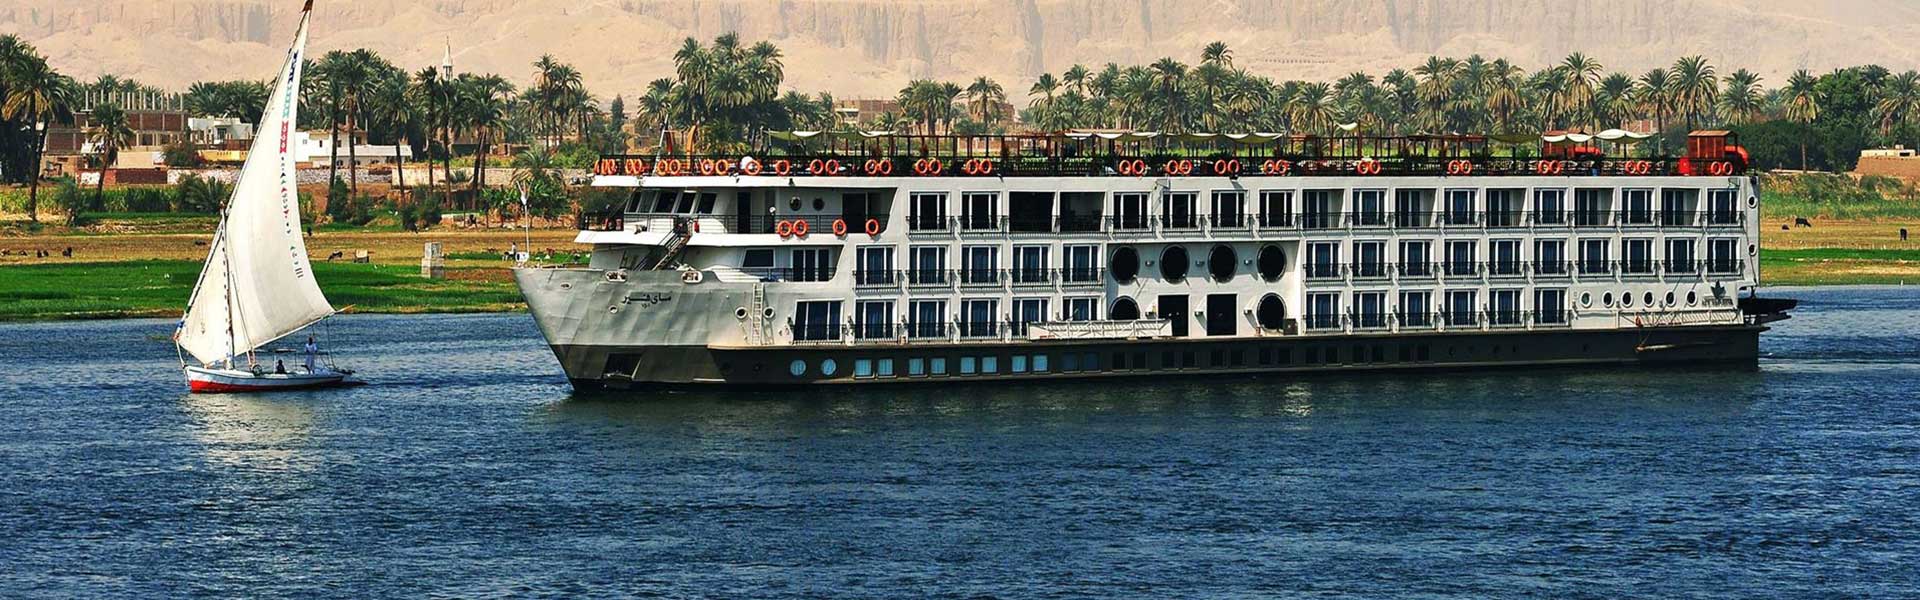 MS MayFair Nile Cruise 8 Days  From Luxor to Luxor